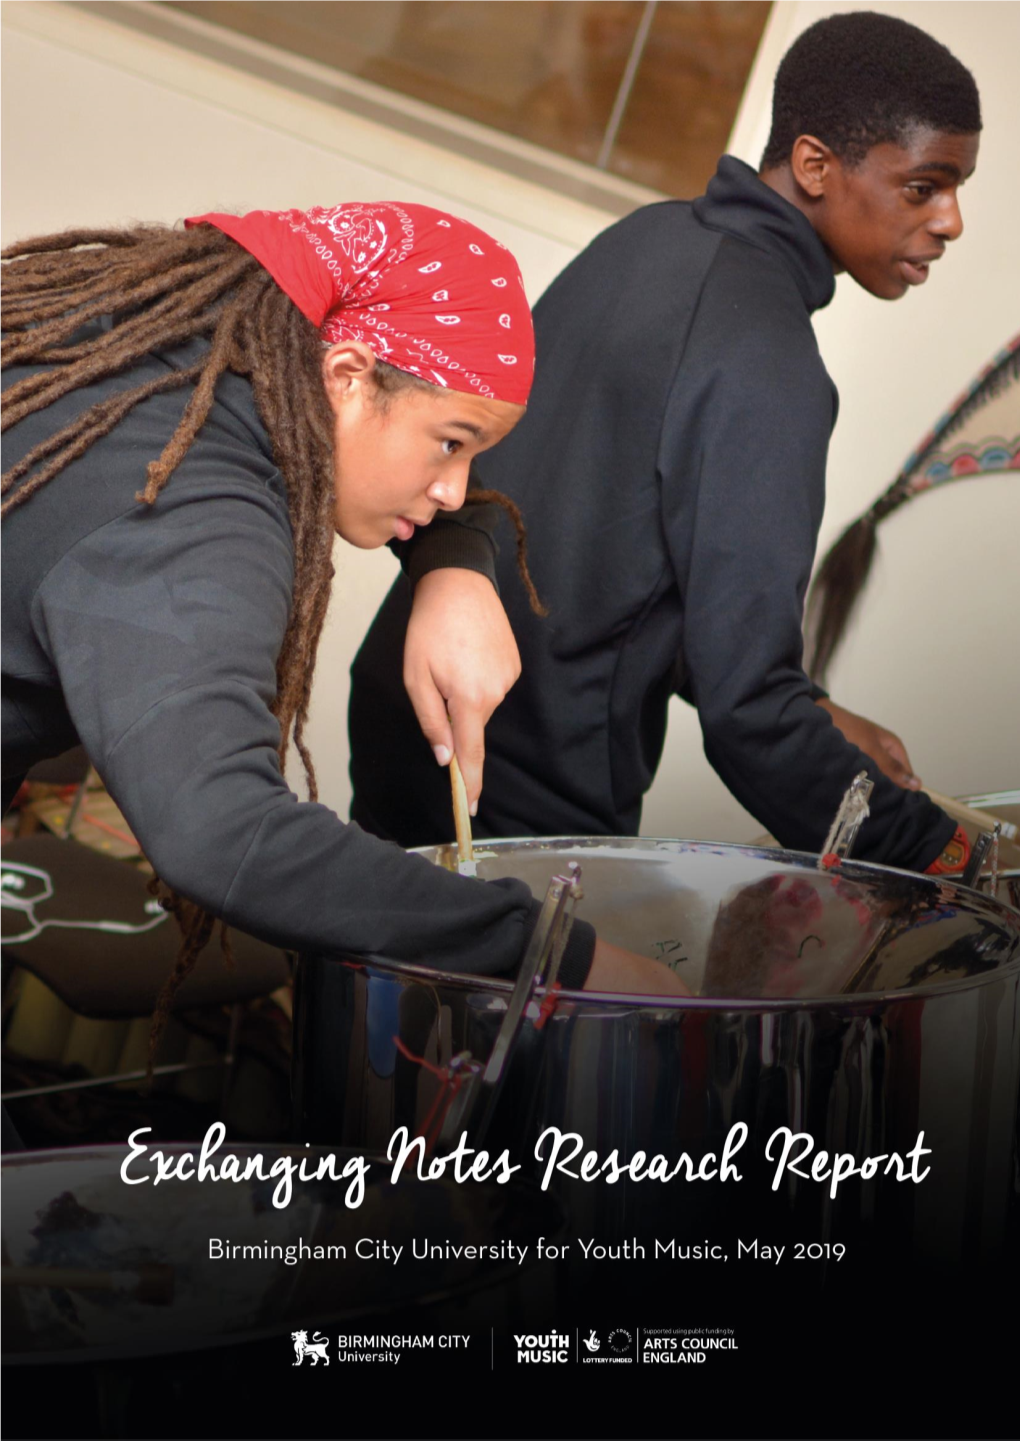 Exchanging Notes Research Report 2019